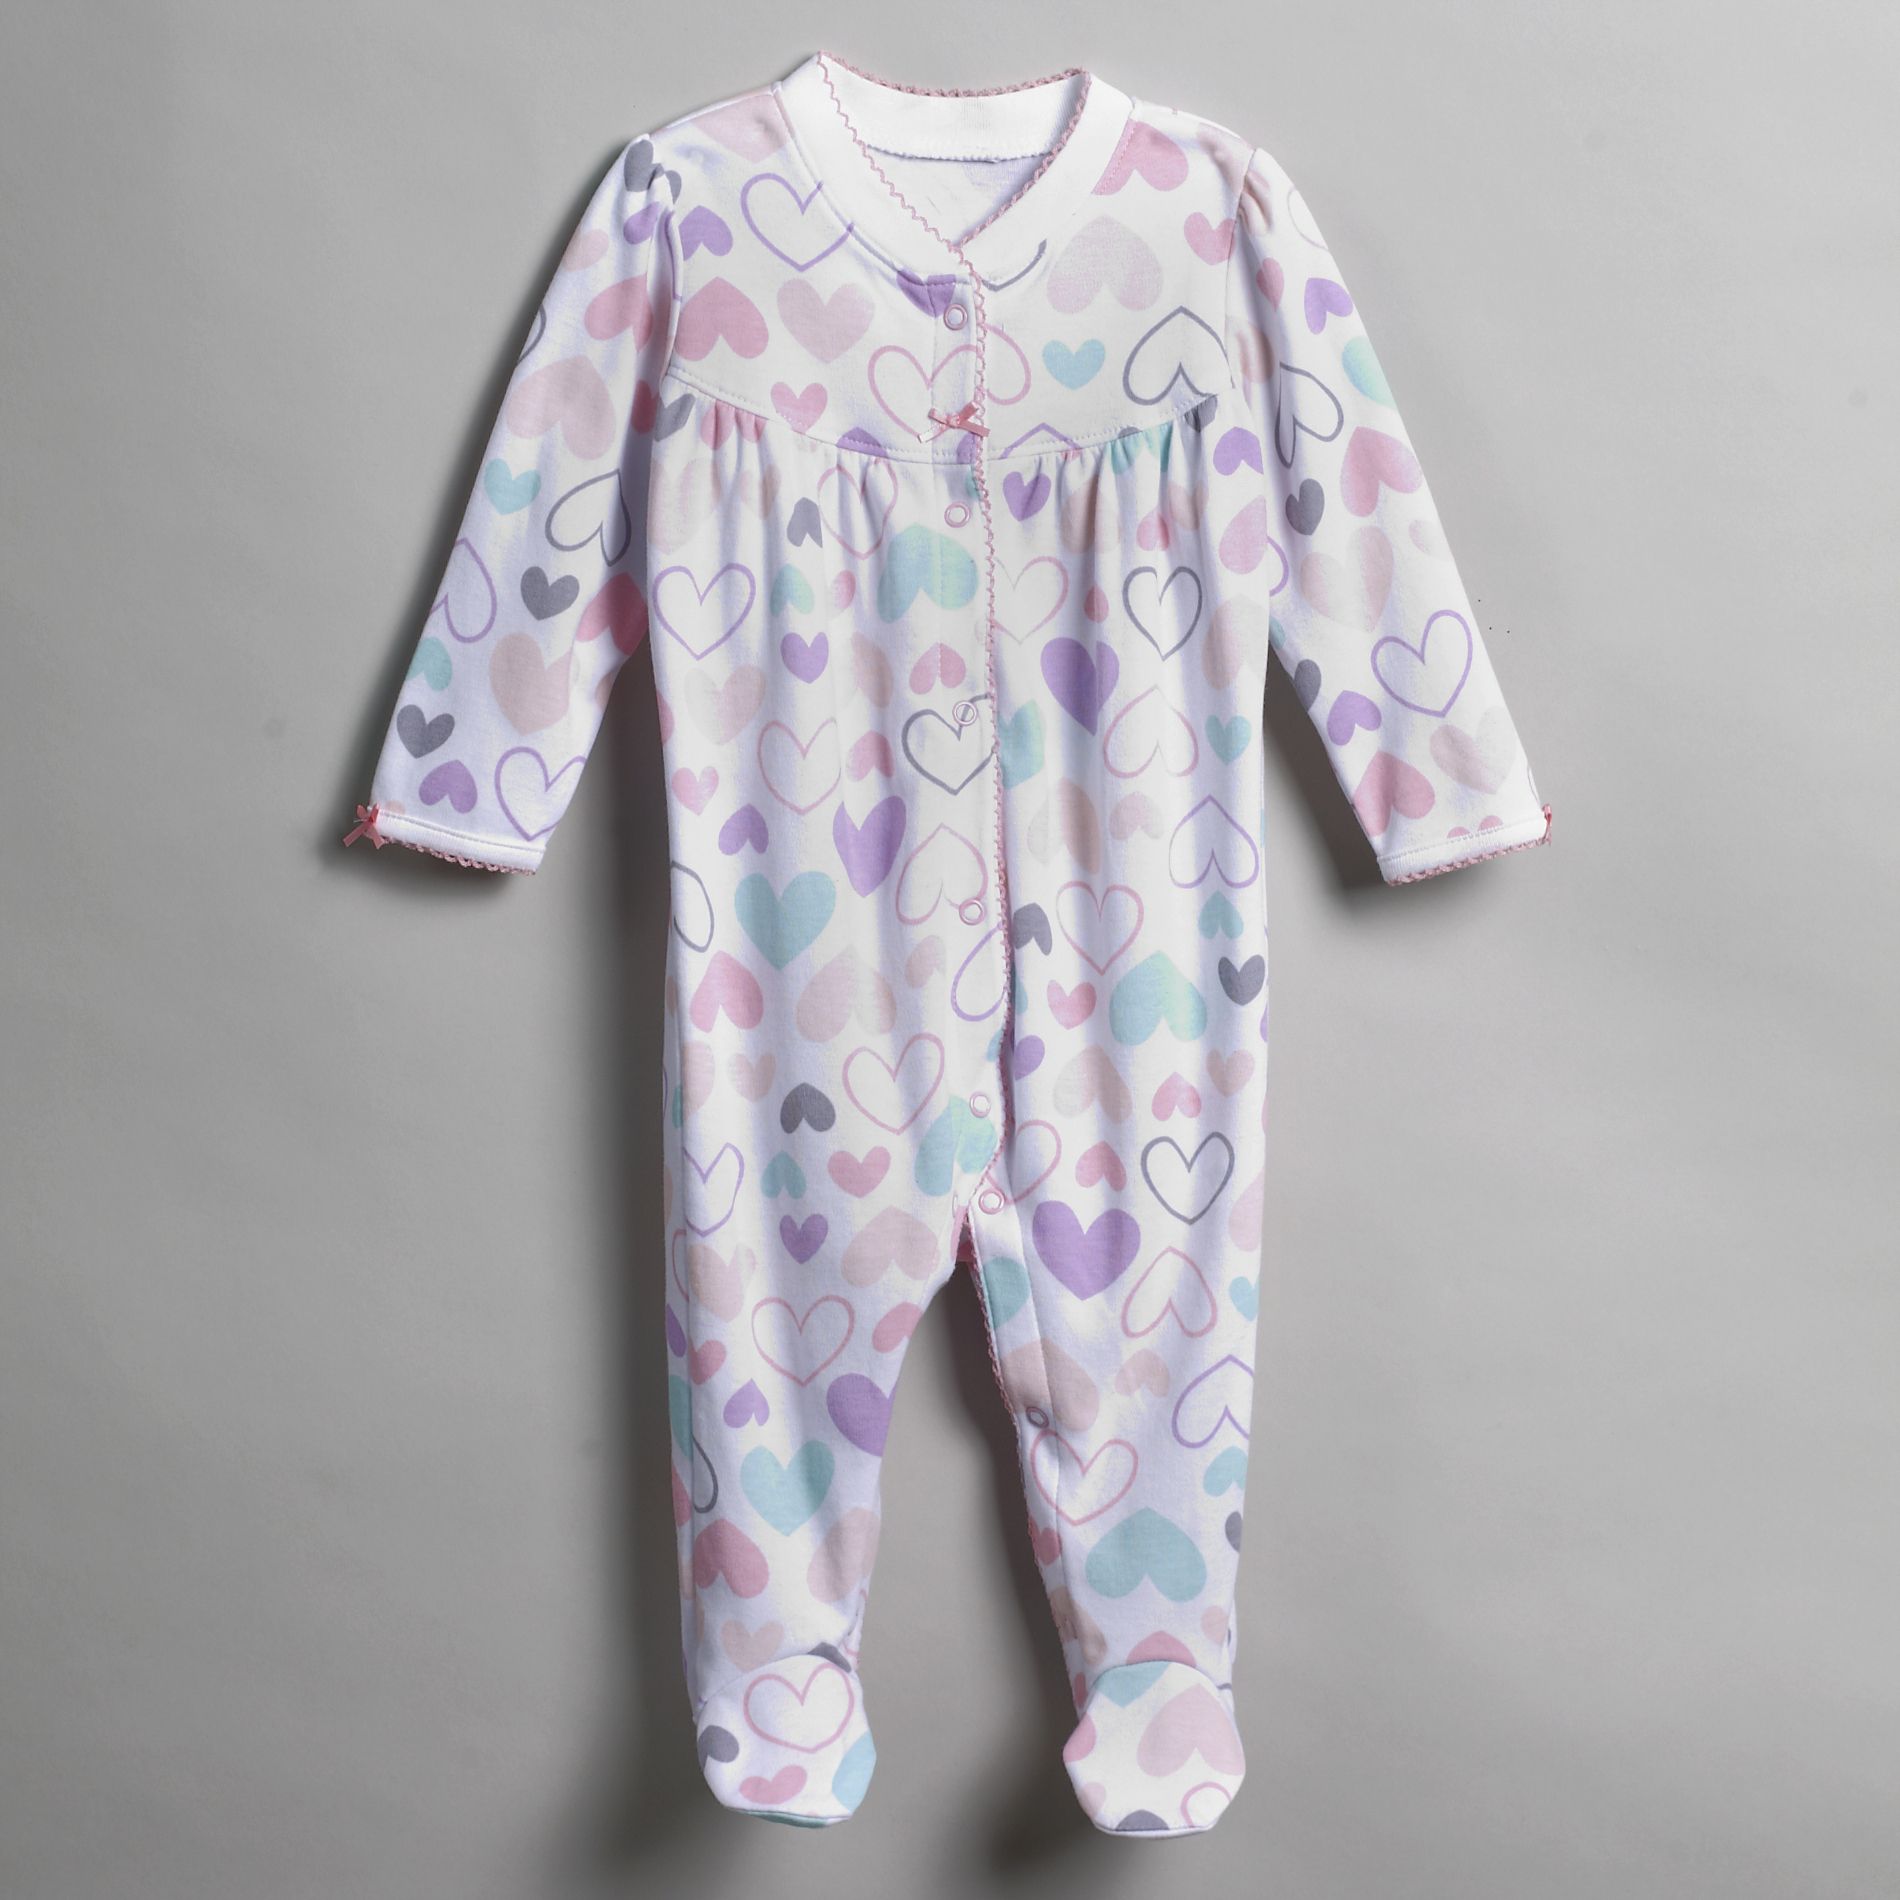 Small Wonders Girls Infant and Toddler Hearts Sleeper